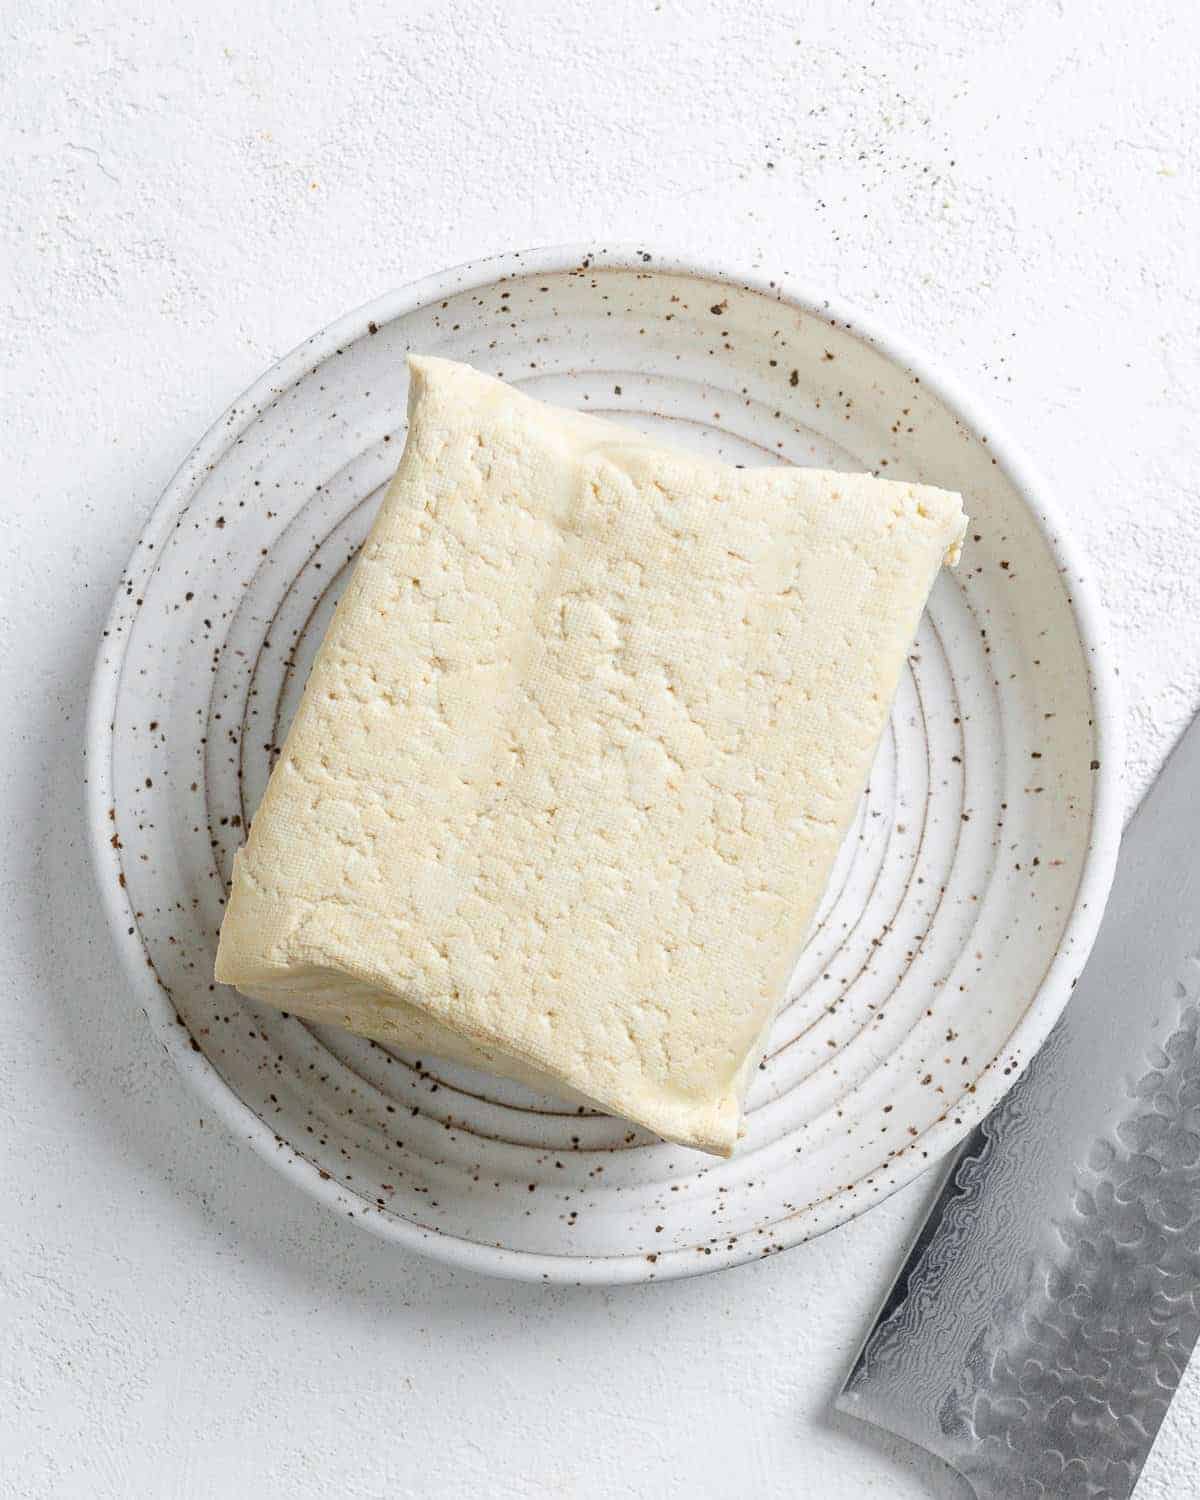 block of tofu on a small white plate against a white surface